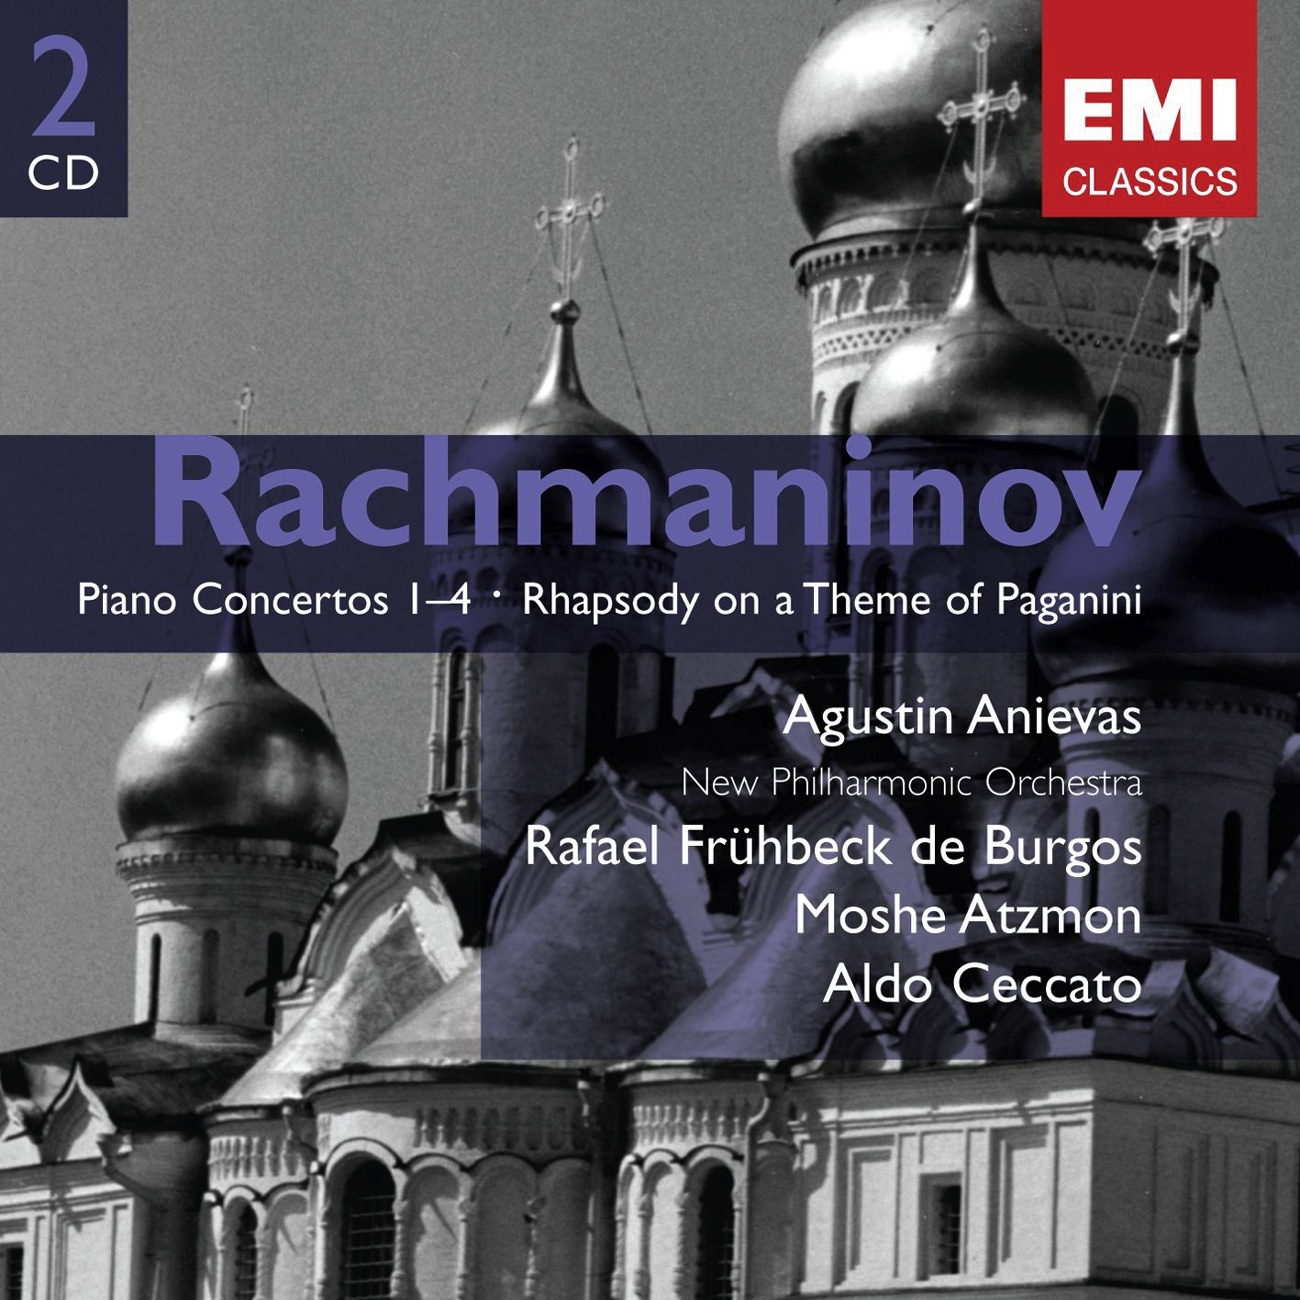 Rhapsody on a Theme of Paganini, Op.43 (1995 Digital Remaster): Introduction (Allegro vivace) & Variation I